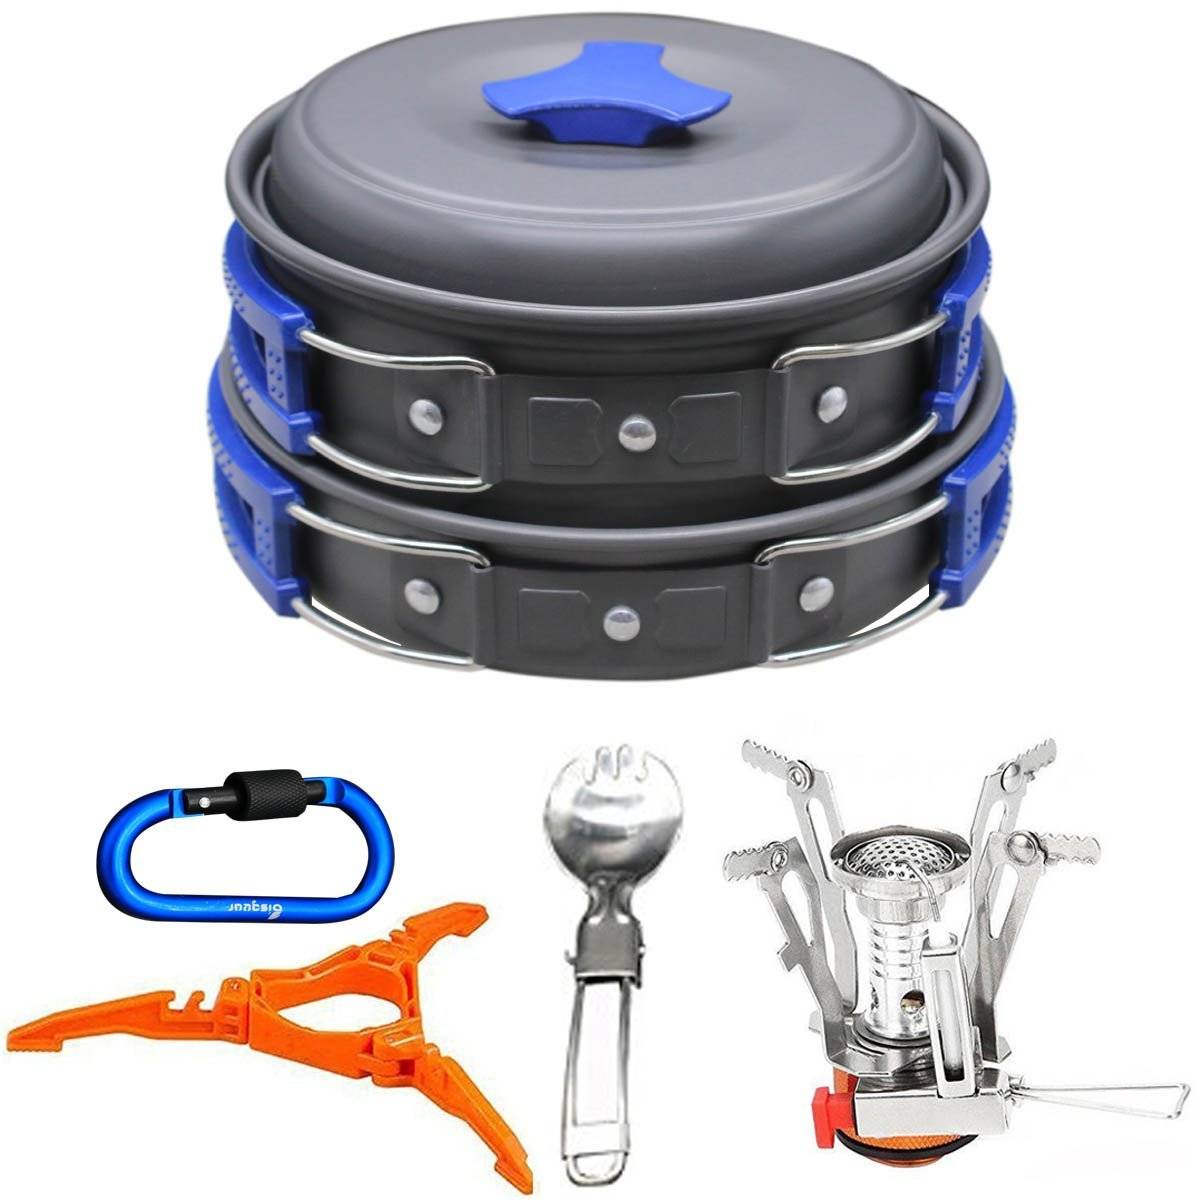 Outdoor Stove Carabiner Canister Camping Cookware Set